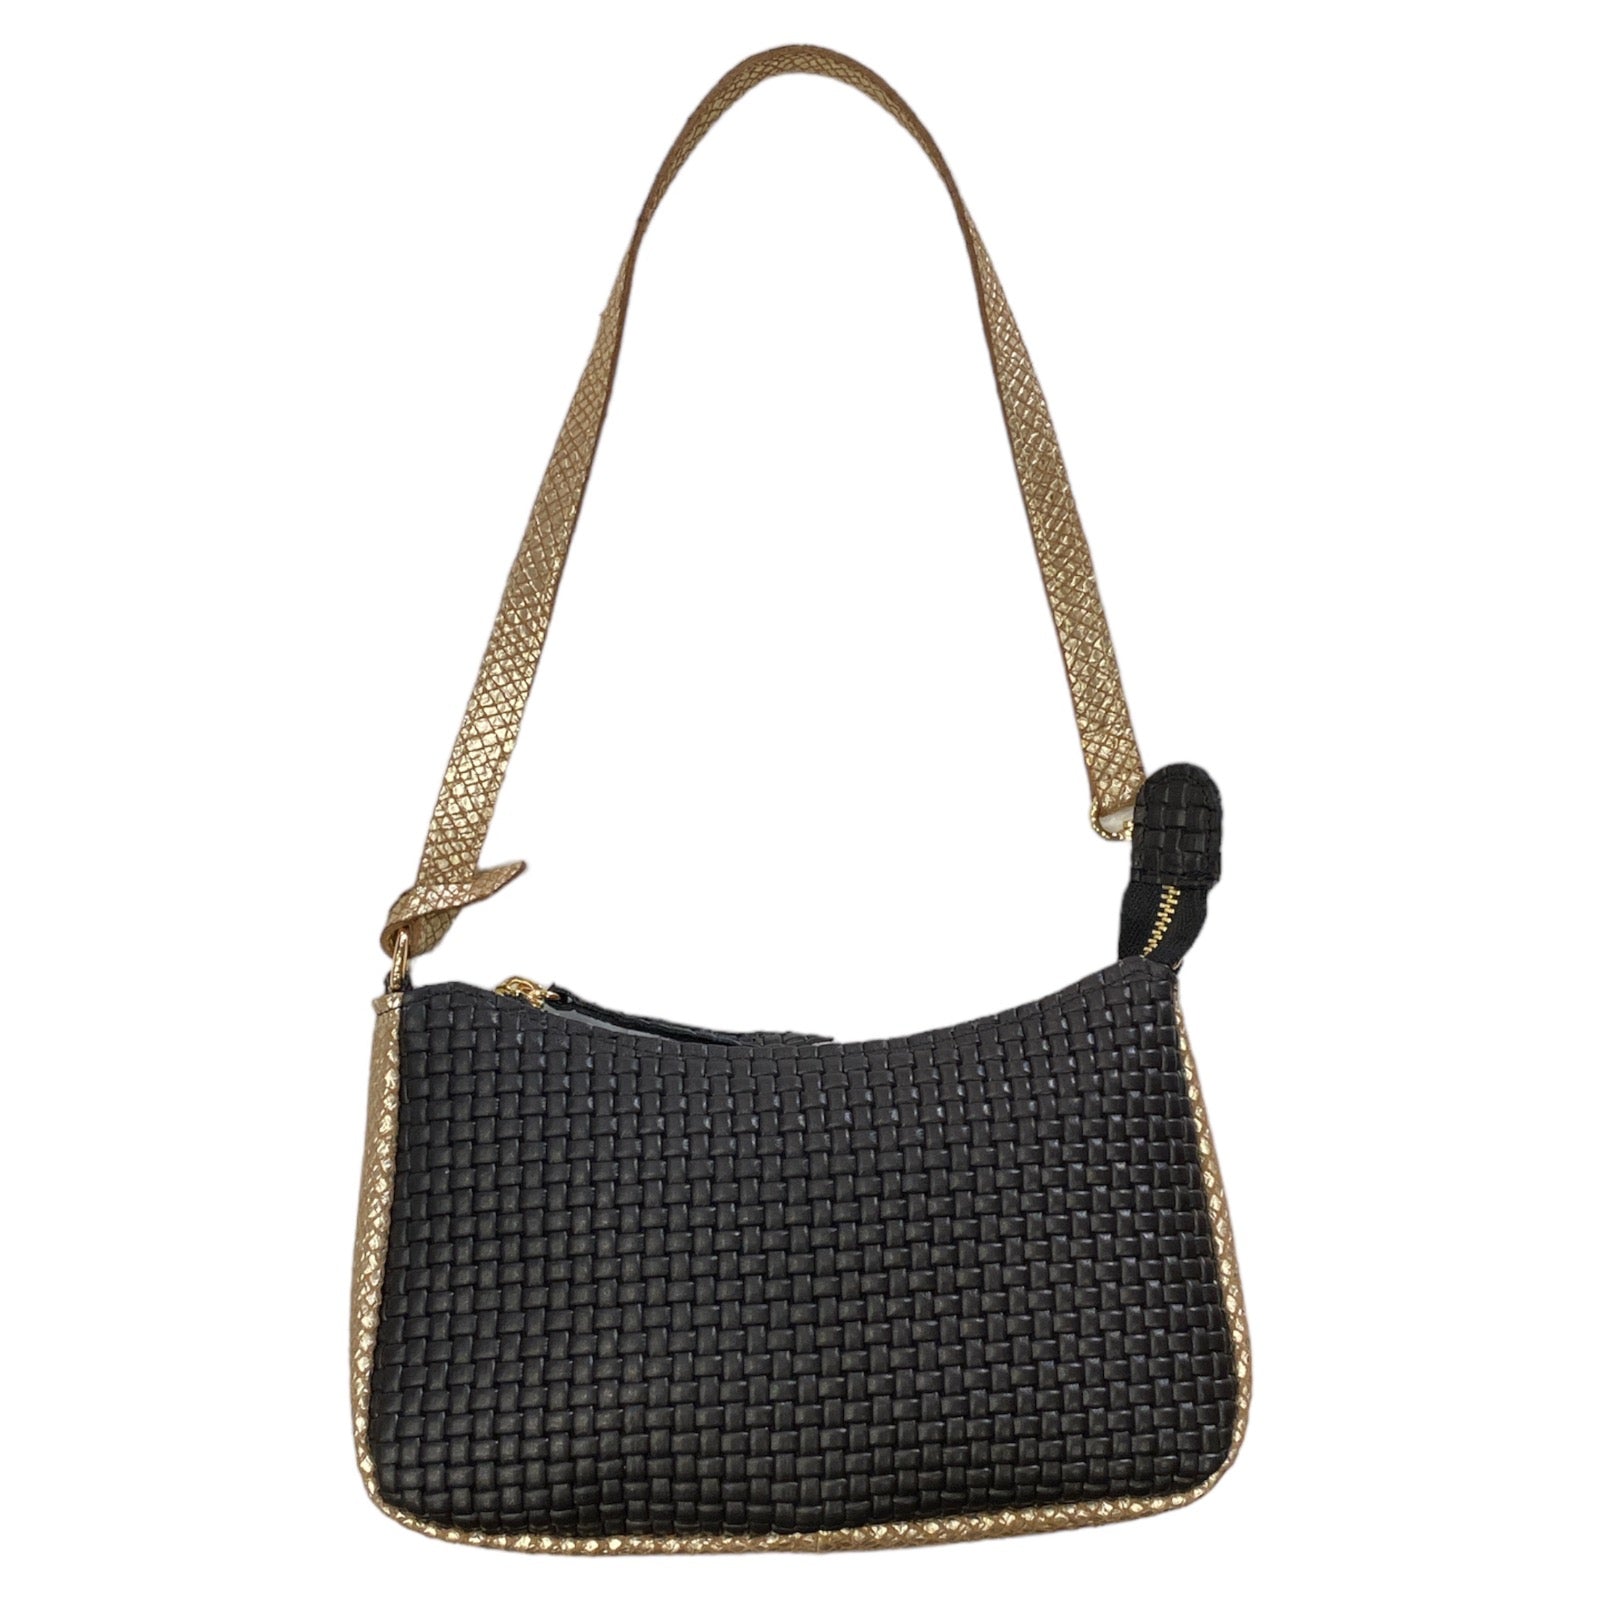 Natalie Small. Black woven-print and gold leather evening bag